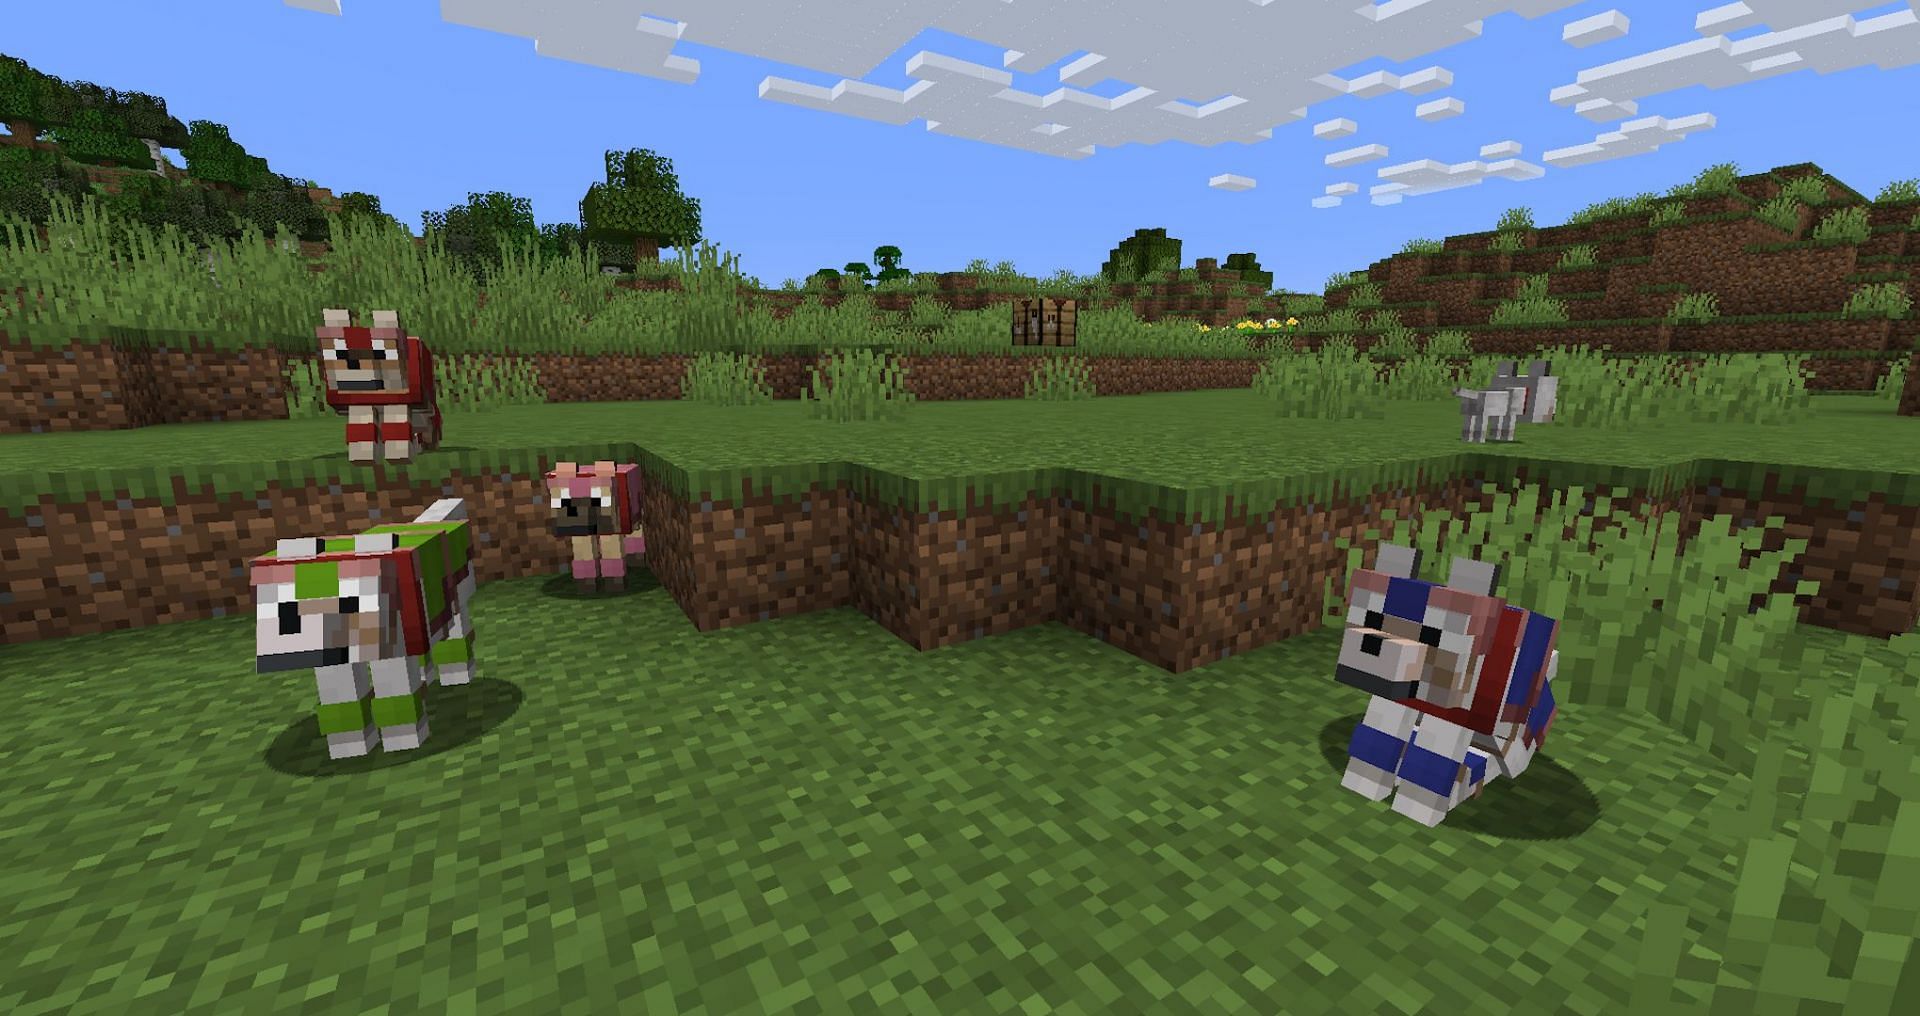 Wolves are by far the biggest focus of this snapshot (Image via Mojang)